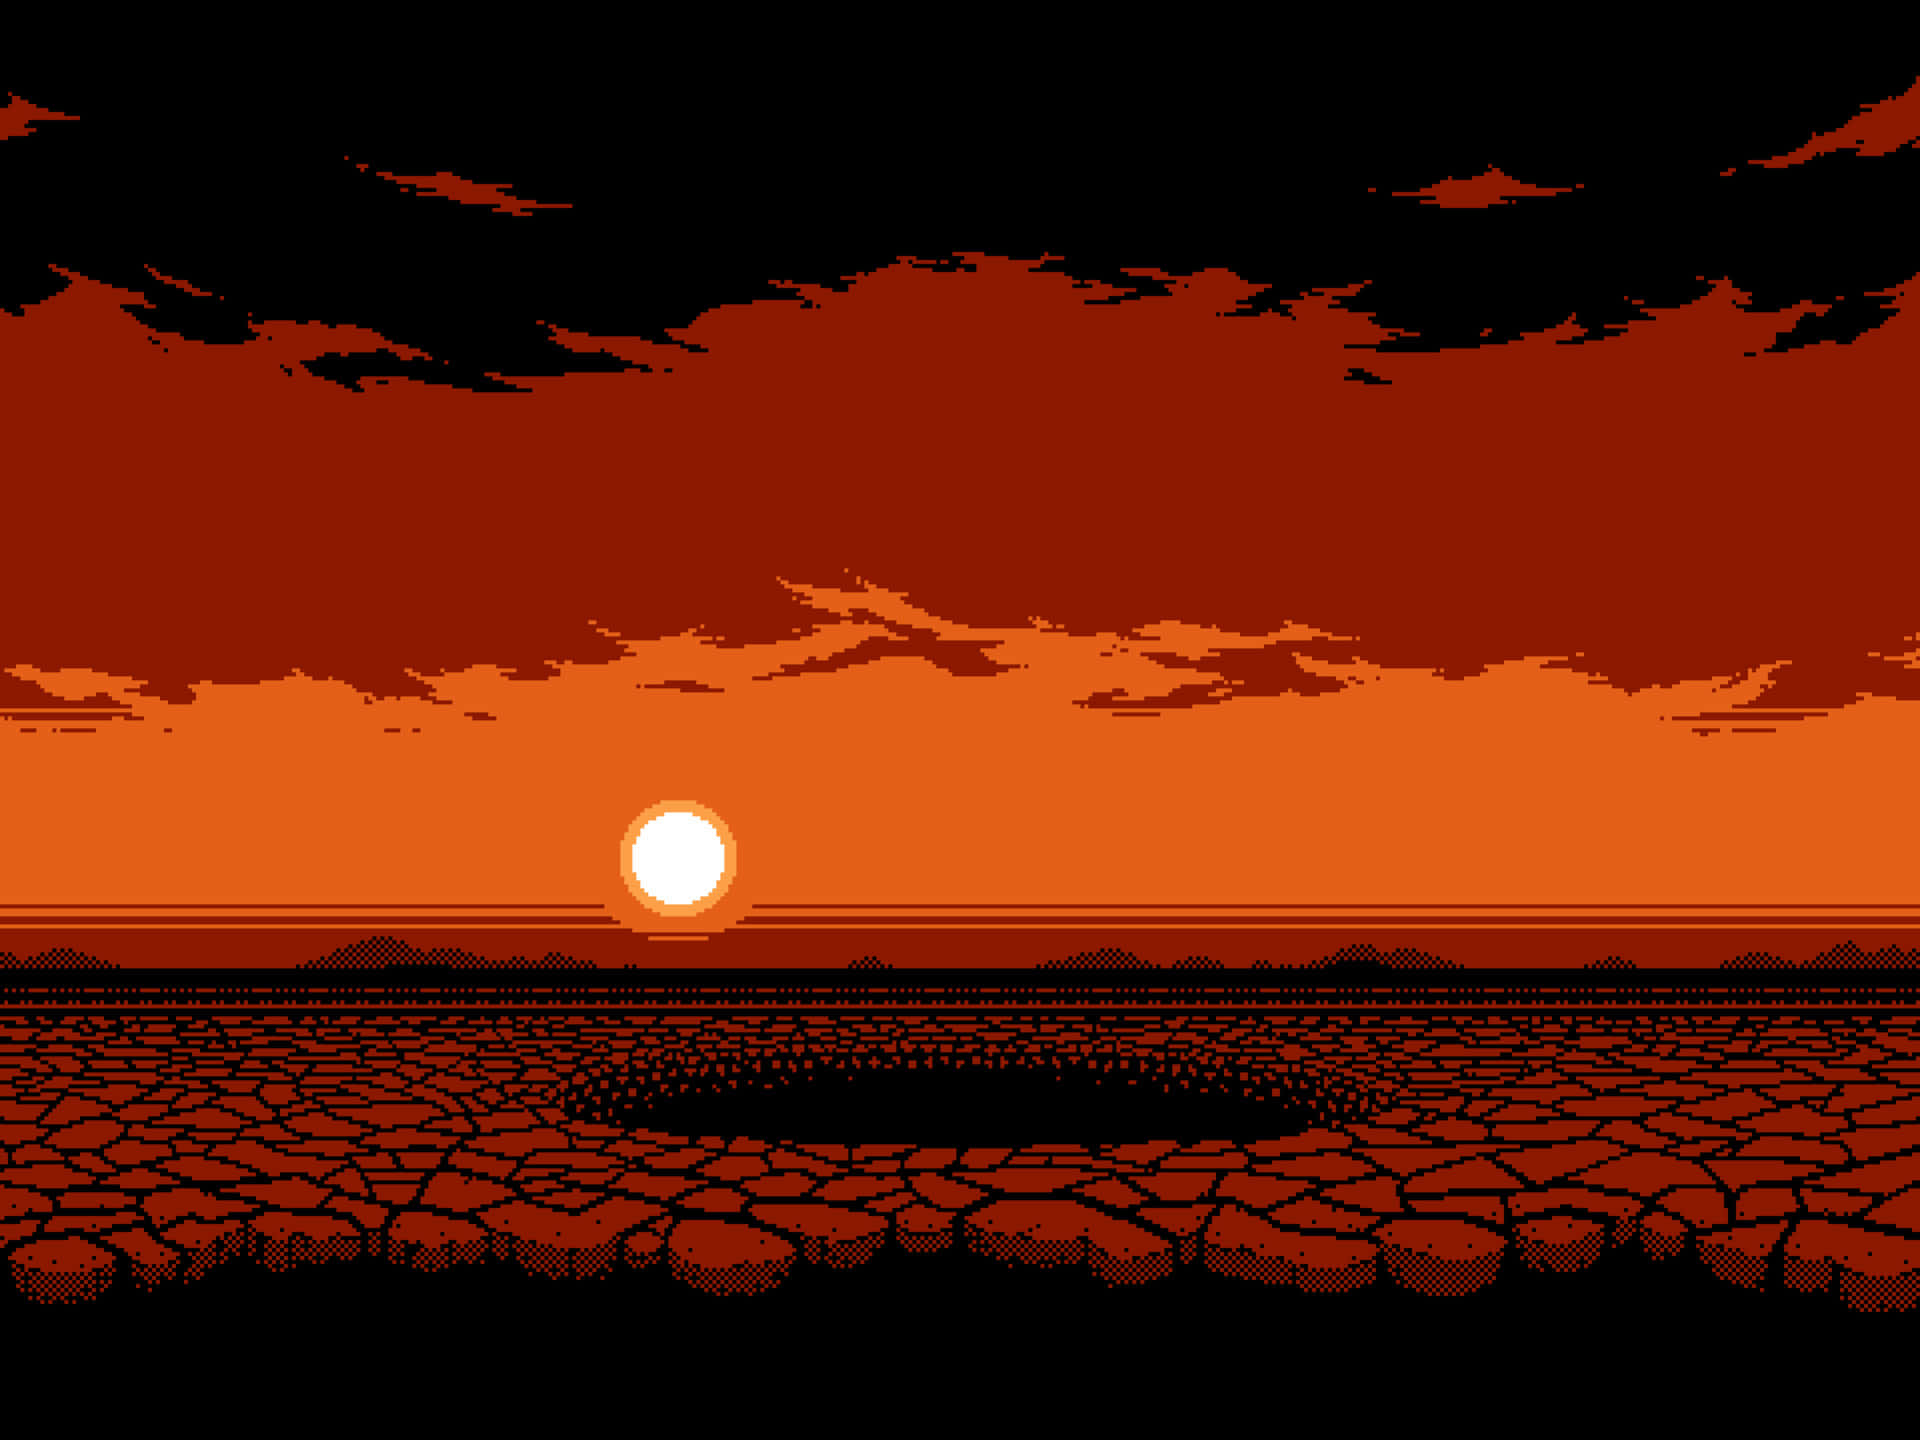 A Pixelated Image Of A Desert Landscape With A Sun Setting Behind It